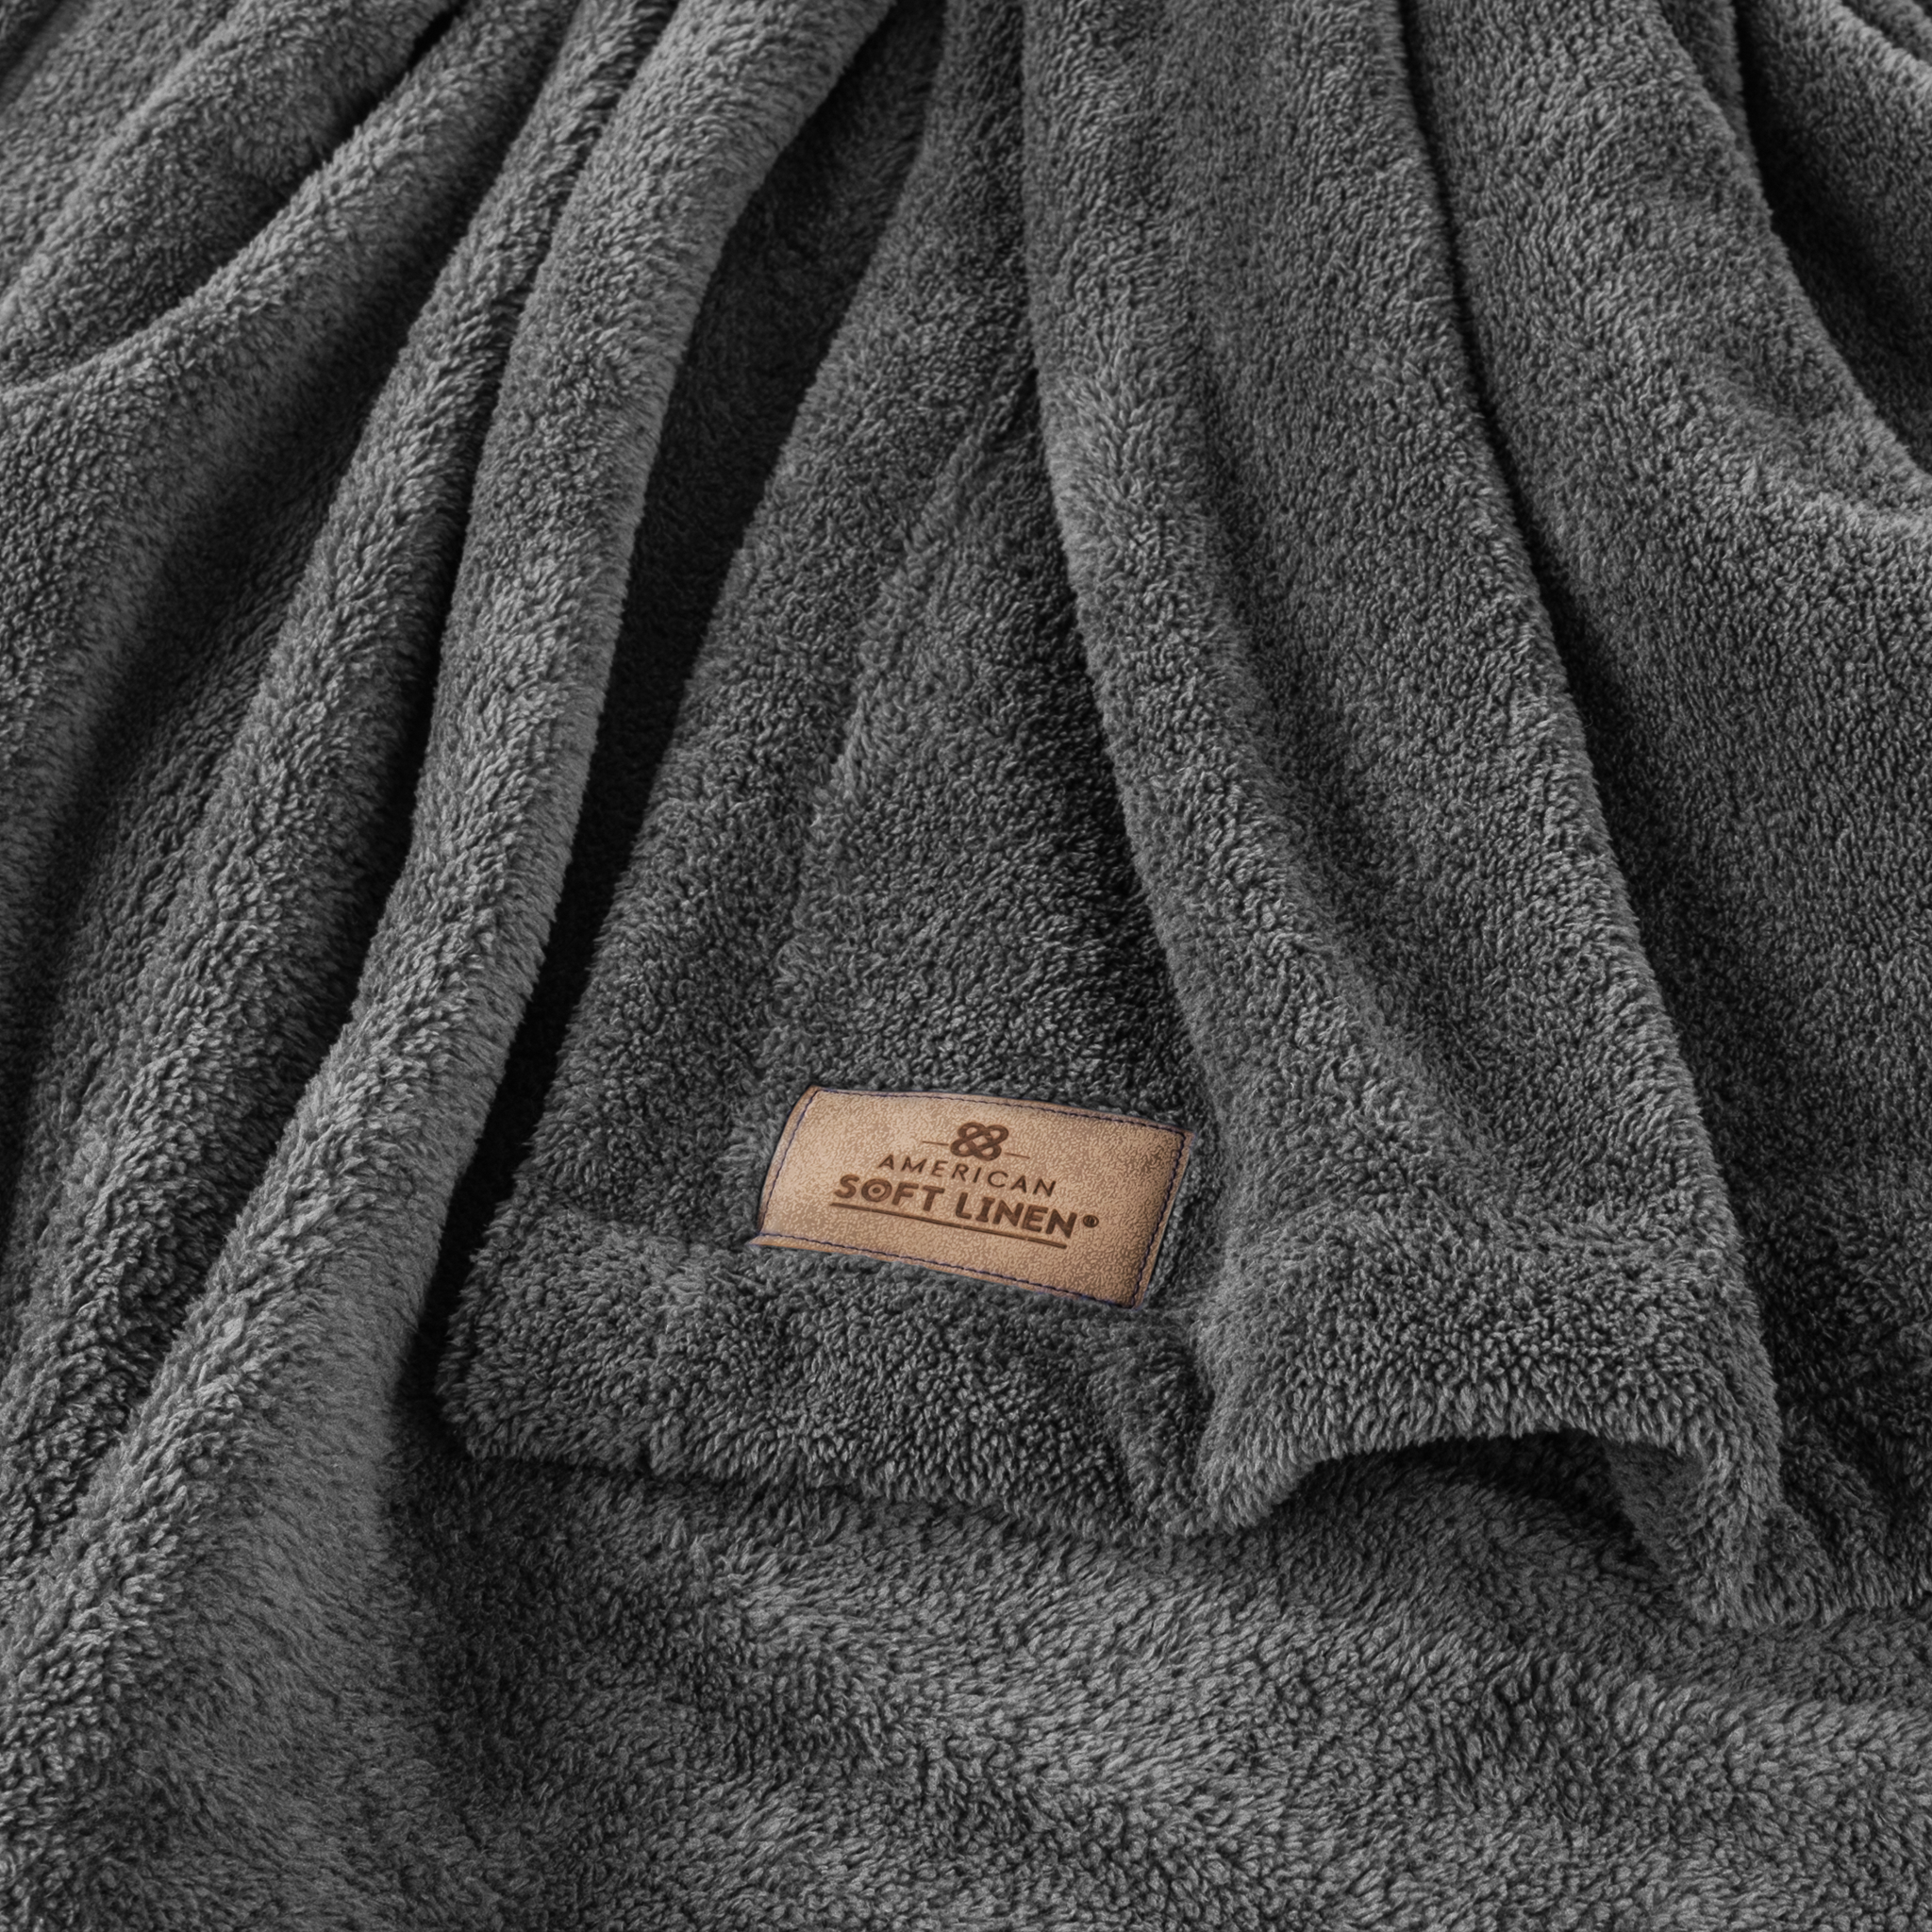 American Soft Linen - Bedding Fleece Blanket - Twin Size 60x80 inches - Gray - 4